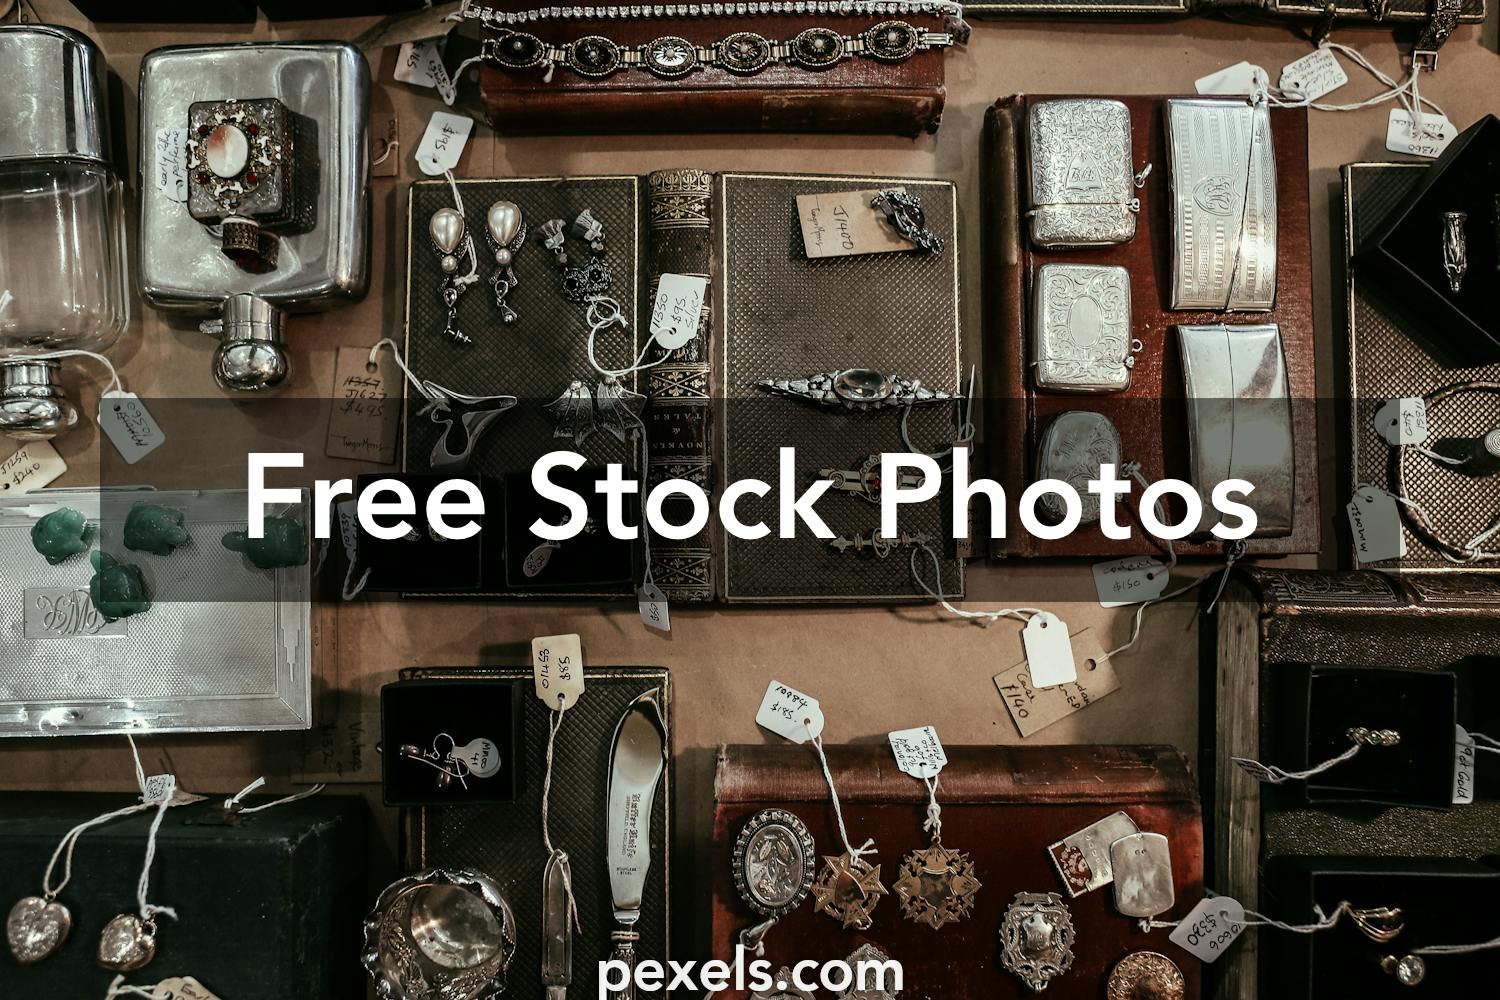 Antique Store Photos, Download The BEST Free Antique Store Stock Photos ...